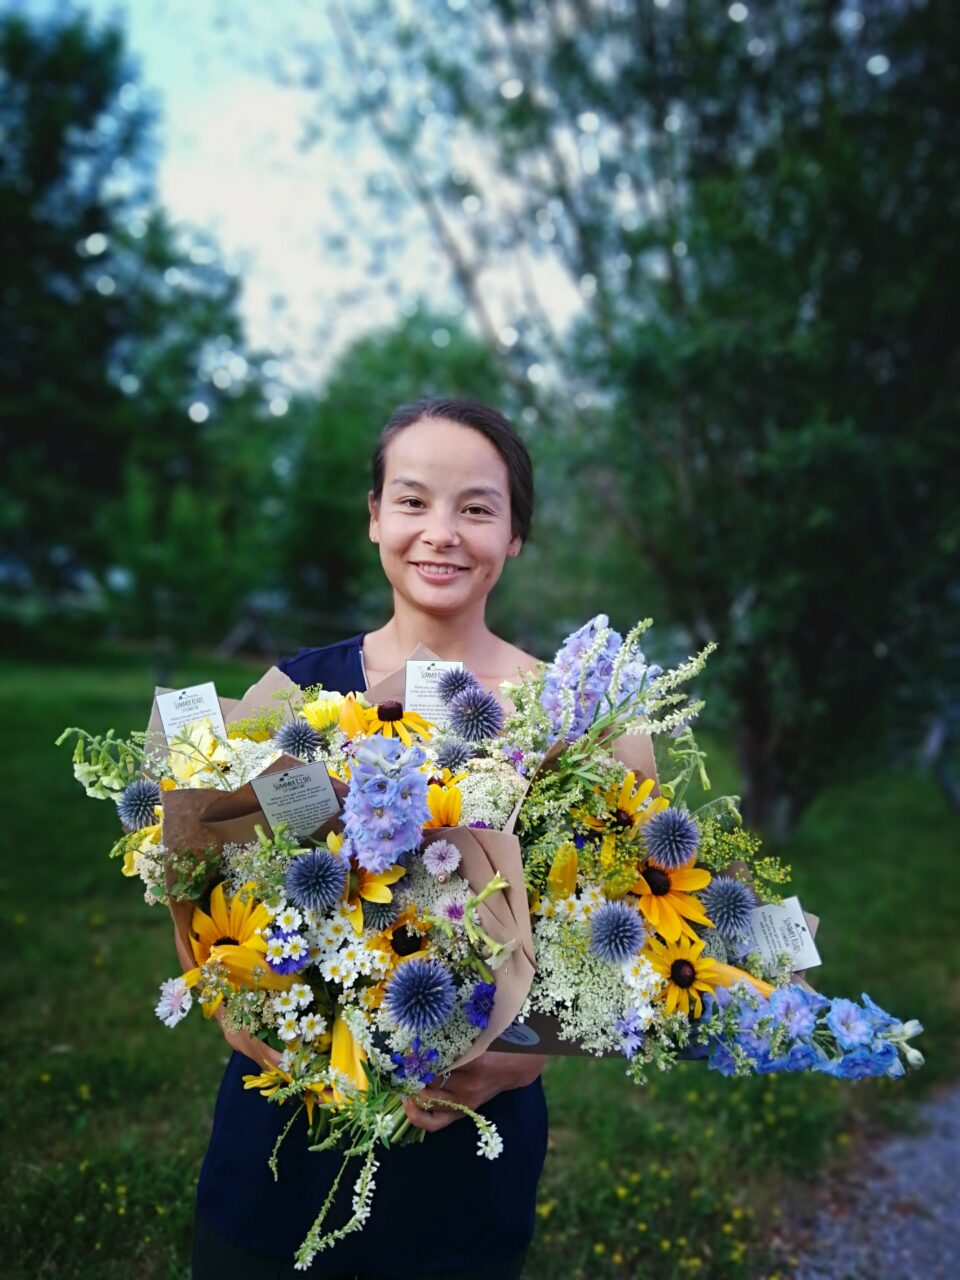 Women smiling with bouquet of flowers in front of body. Green trees in background